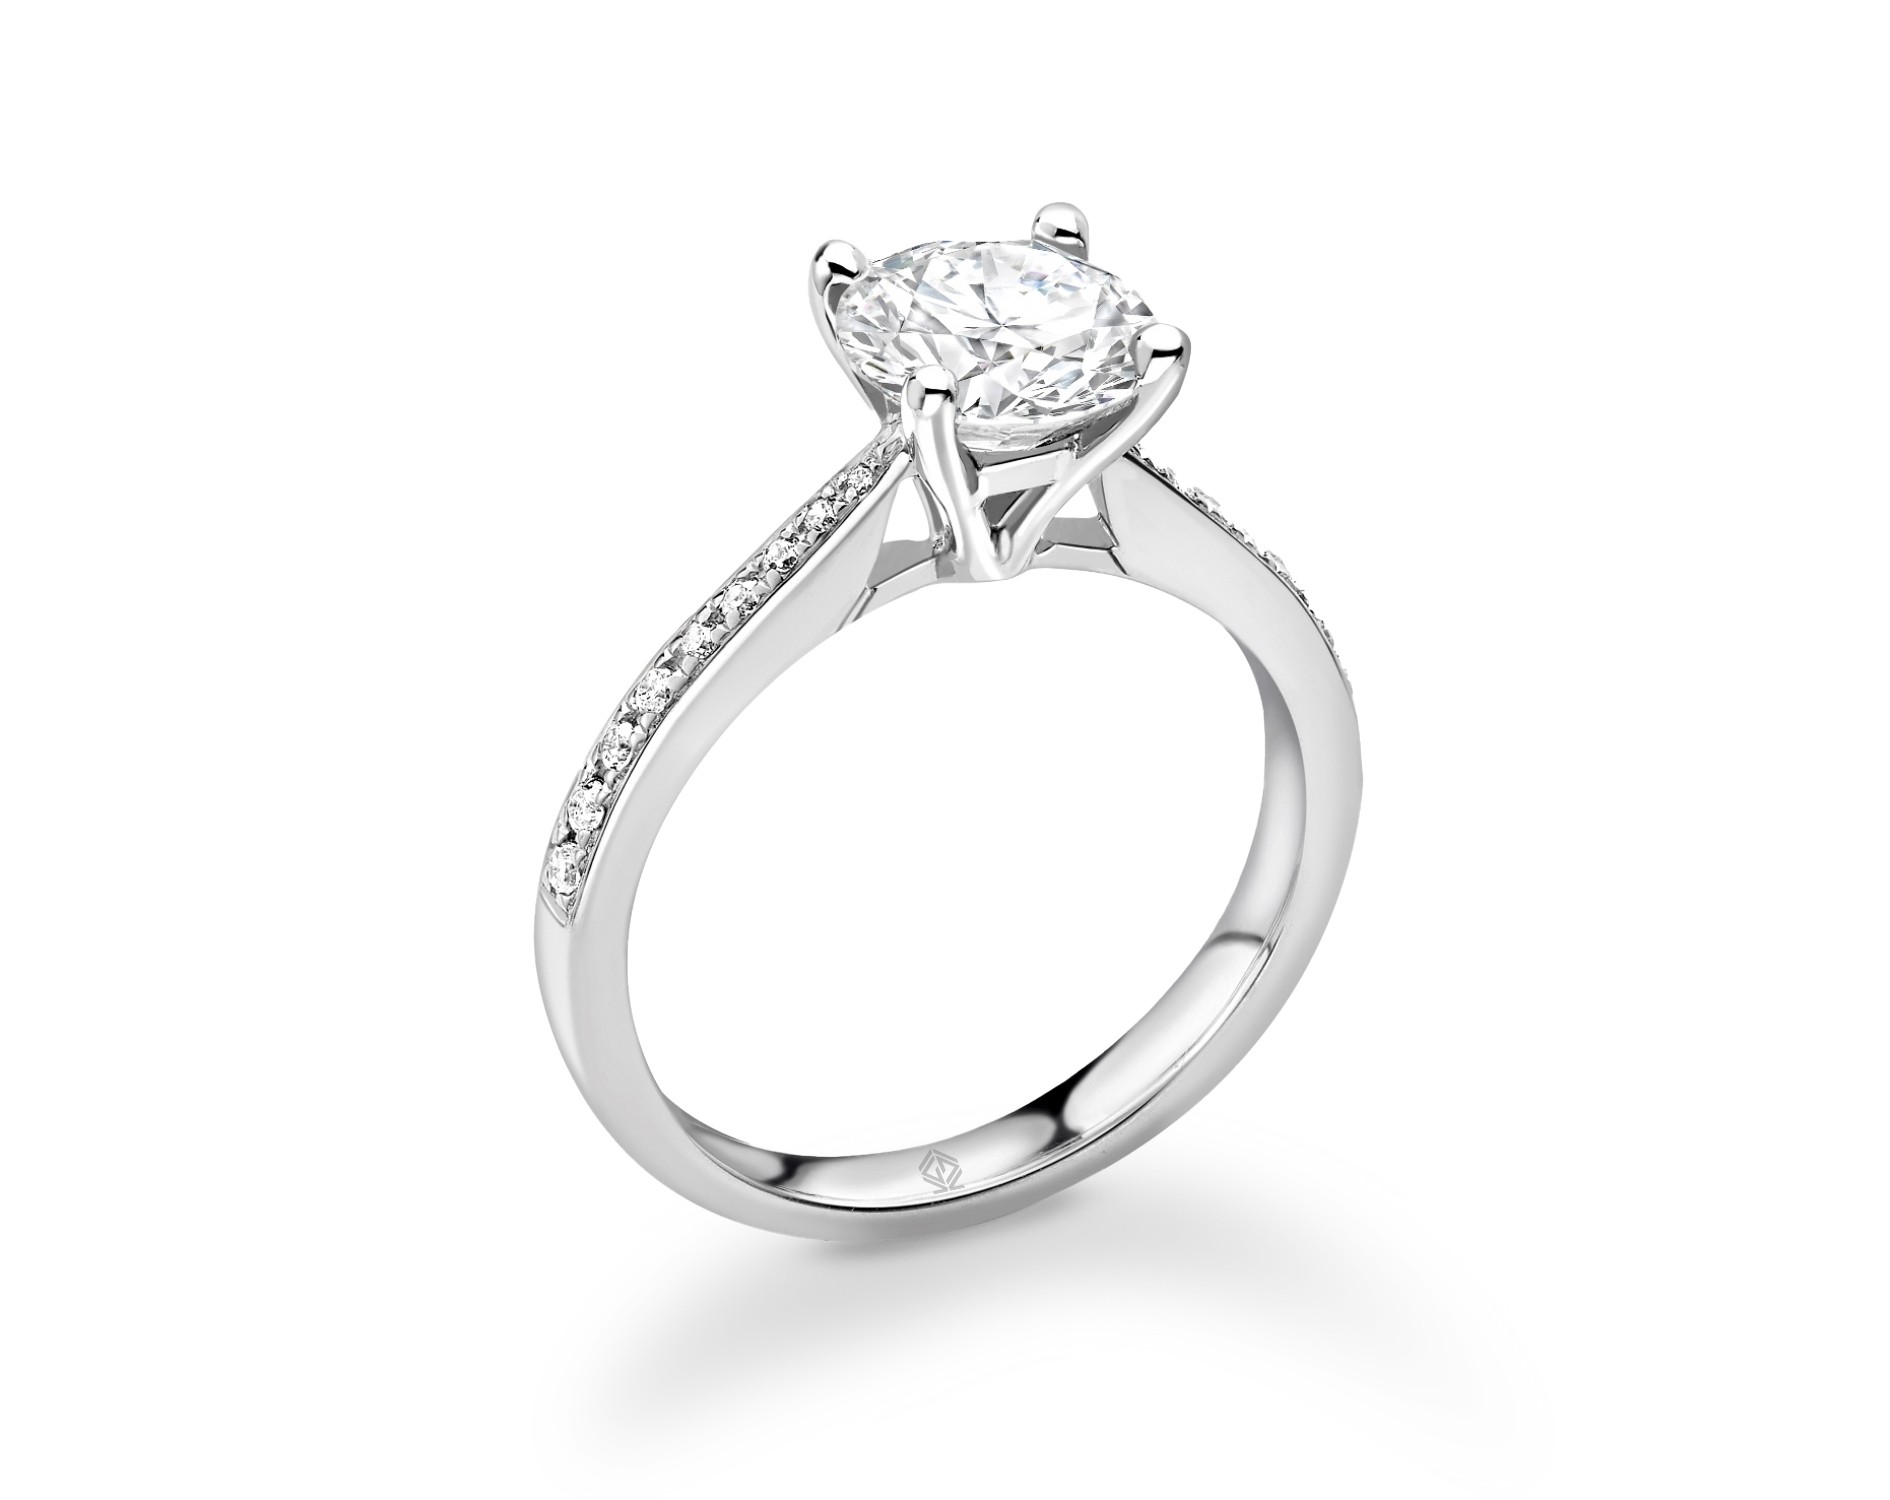 18K WHITE GOLD 4 PRONG DIAMOND ENGAGEMENT RING WITH SIDE STONES IN PRONG SET